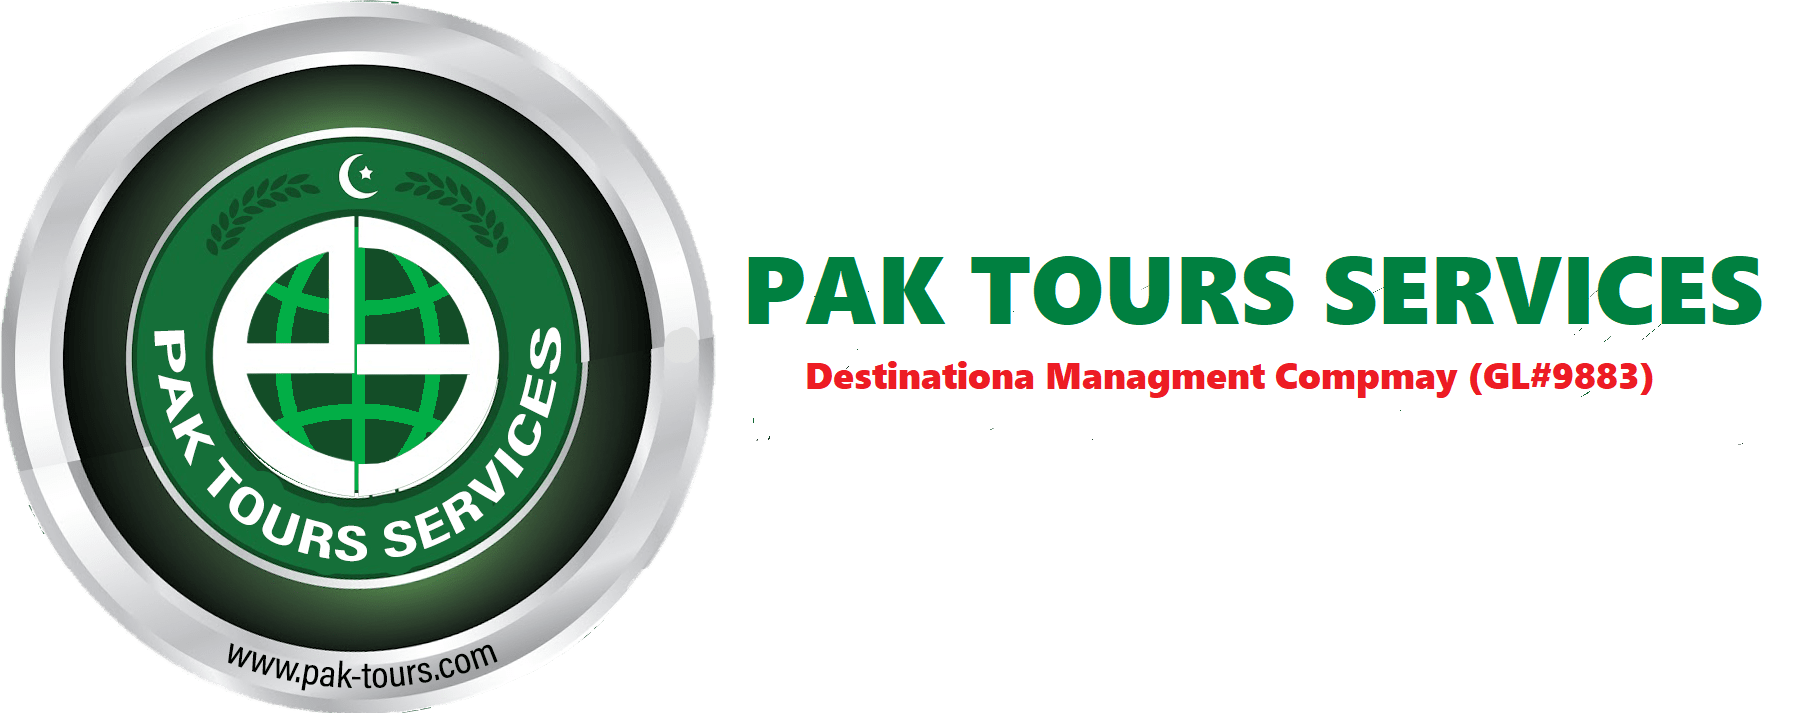 Your Trusted Travel Partner | Baku With Dubai Tour Packages from Pakistan 7 Days - Your Trusted Travel Partner